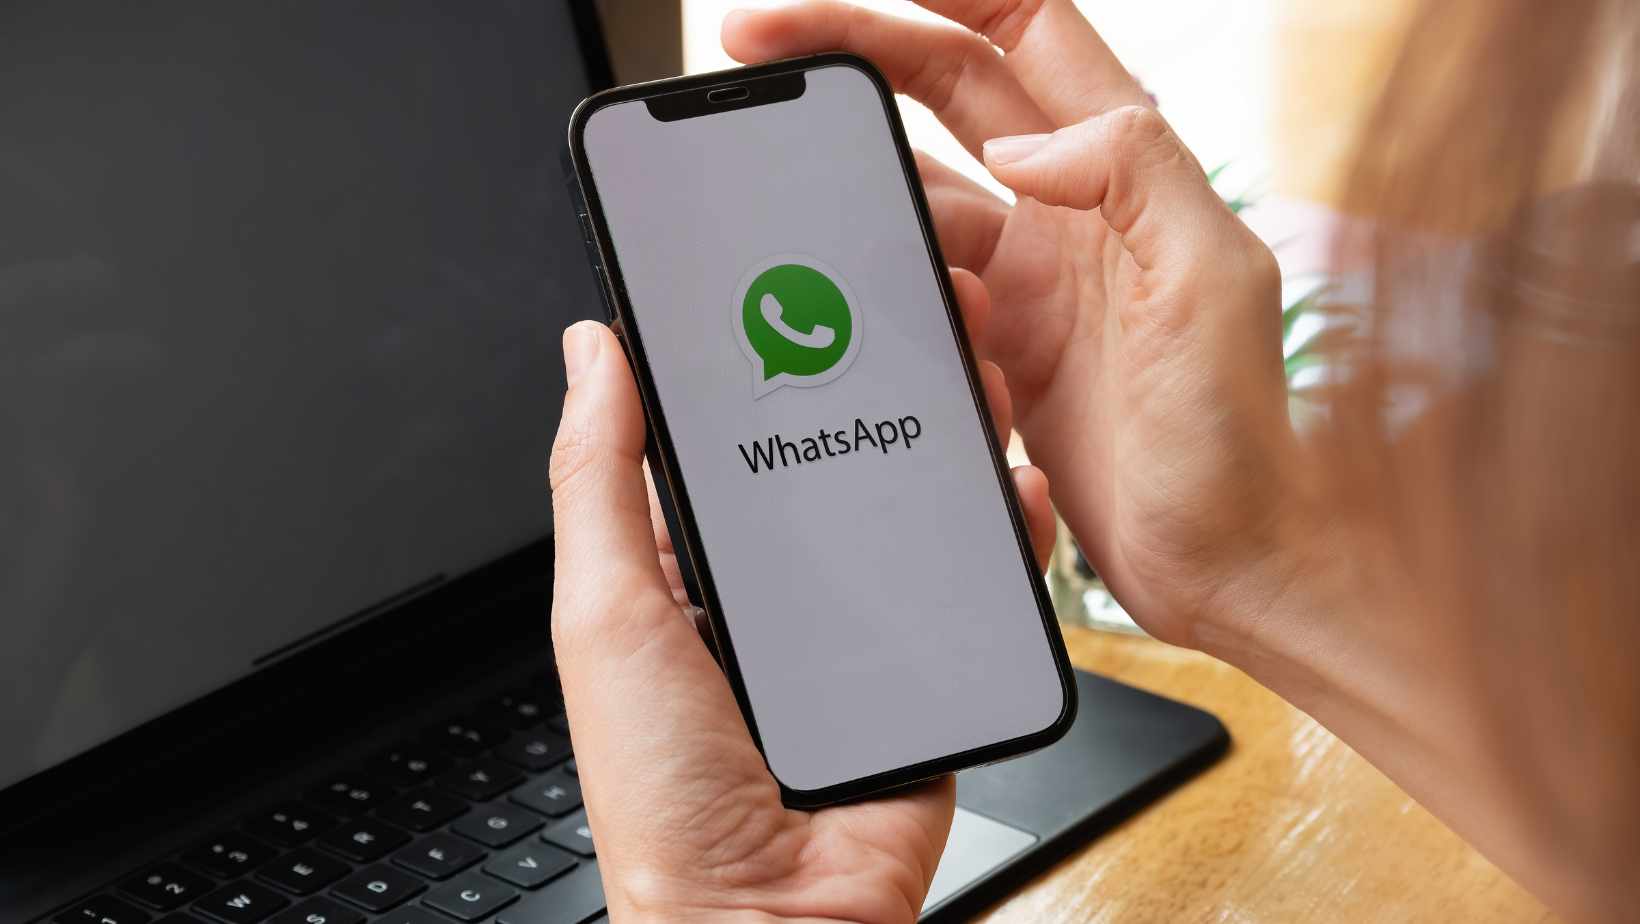 do you get notifications for archived messages on whatsapp